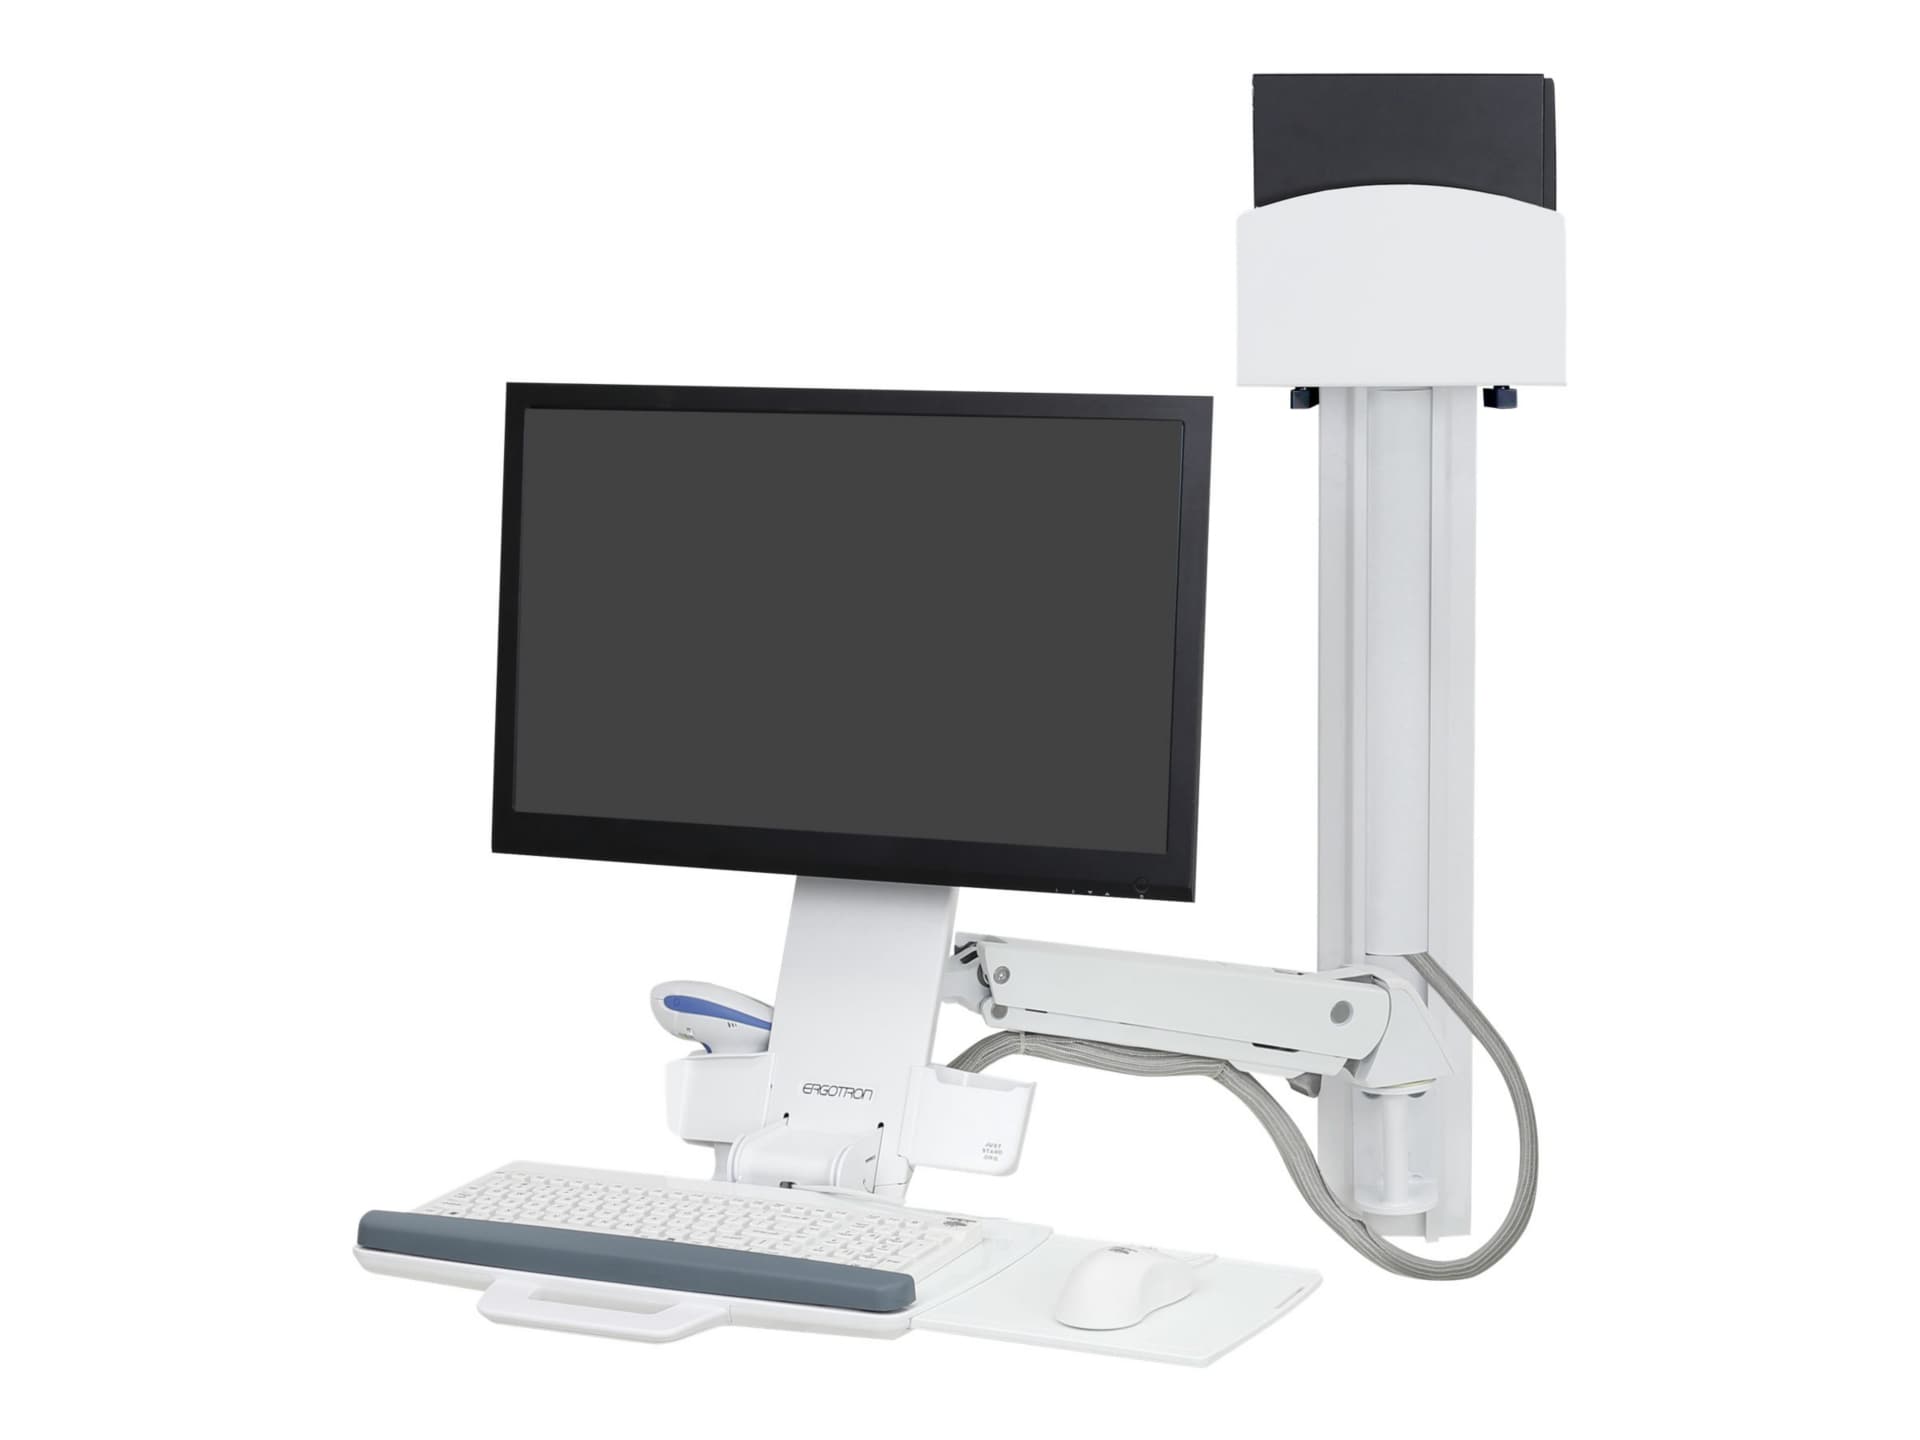 Ergotron StyleView Sit-Stand Combo System mounting kit - Patented Constant